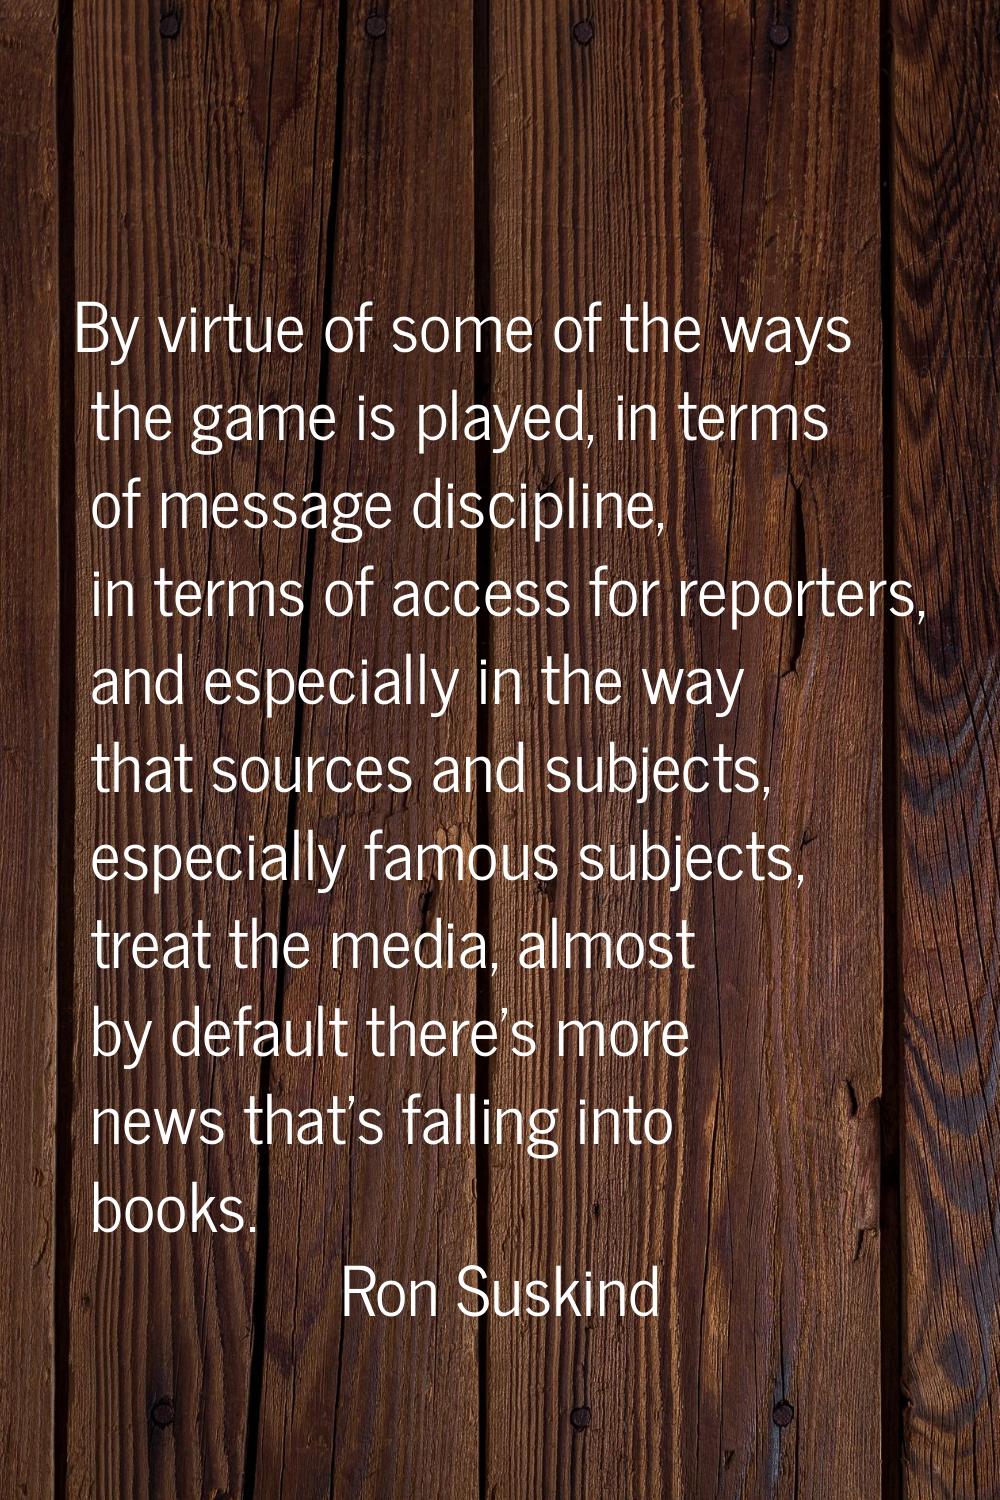 By virtue of some of the ways the game is played, in terms of message discipline, in terms of acces